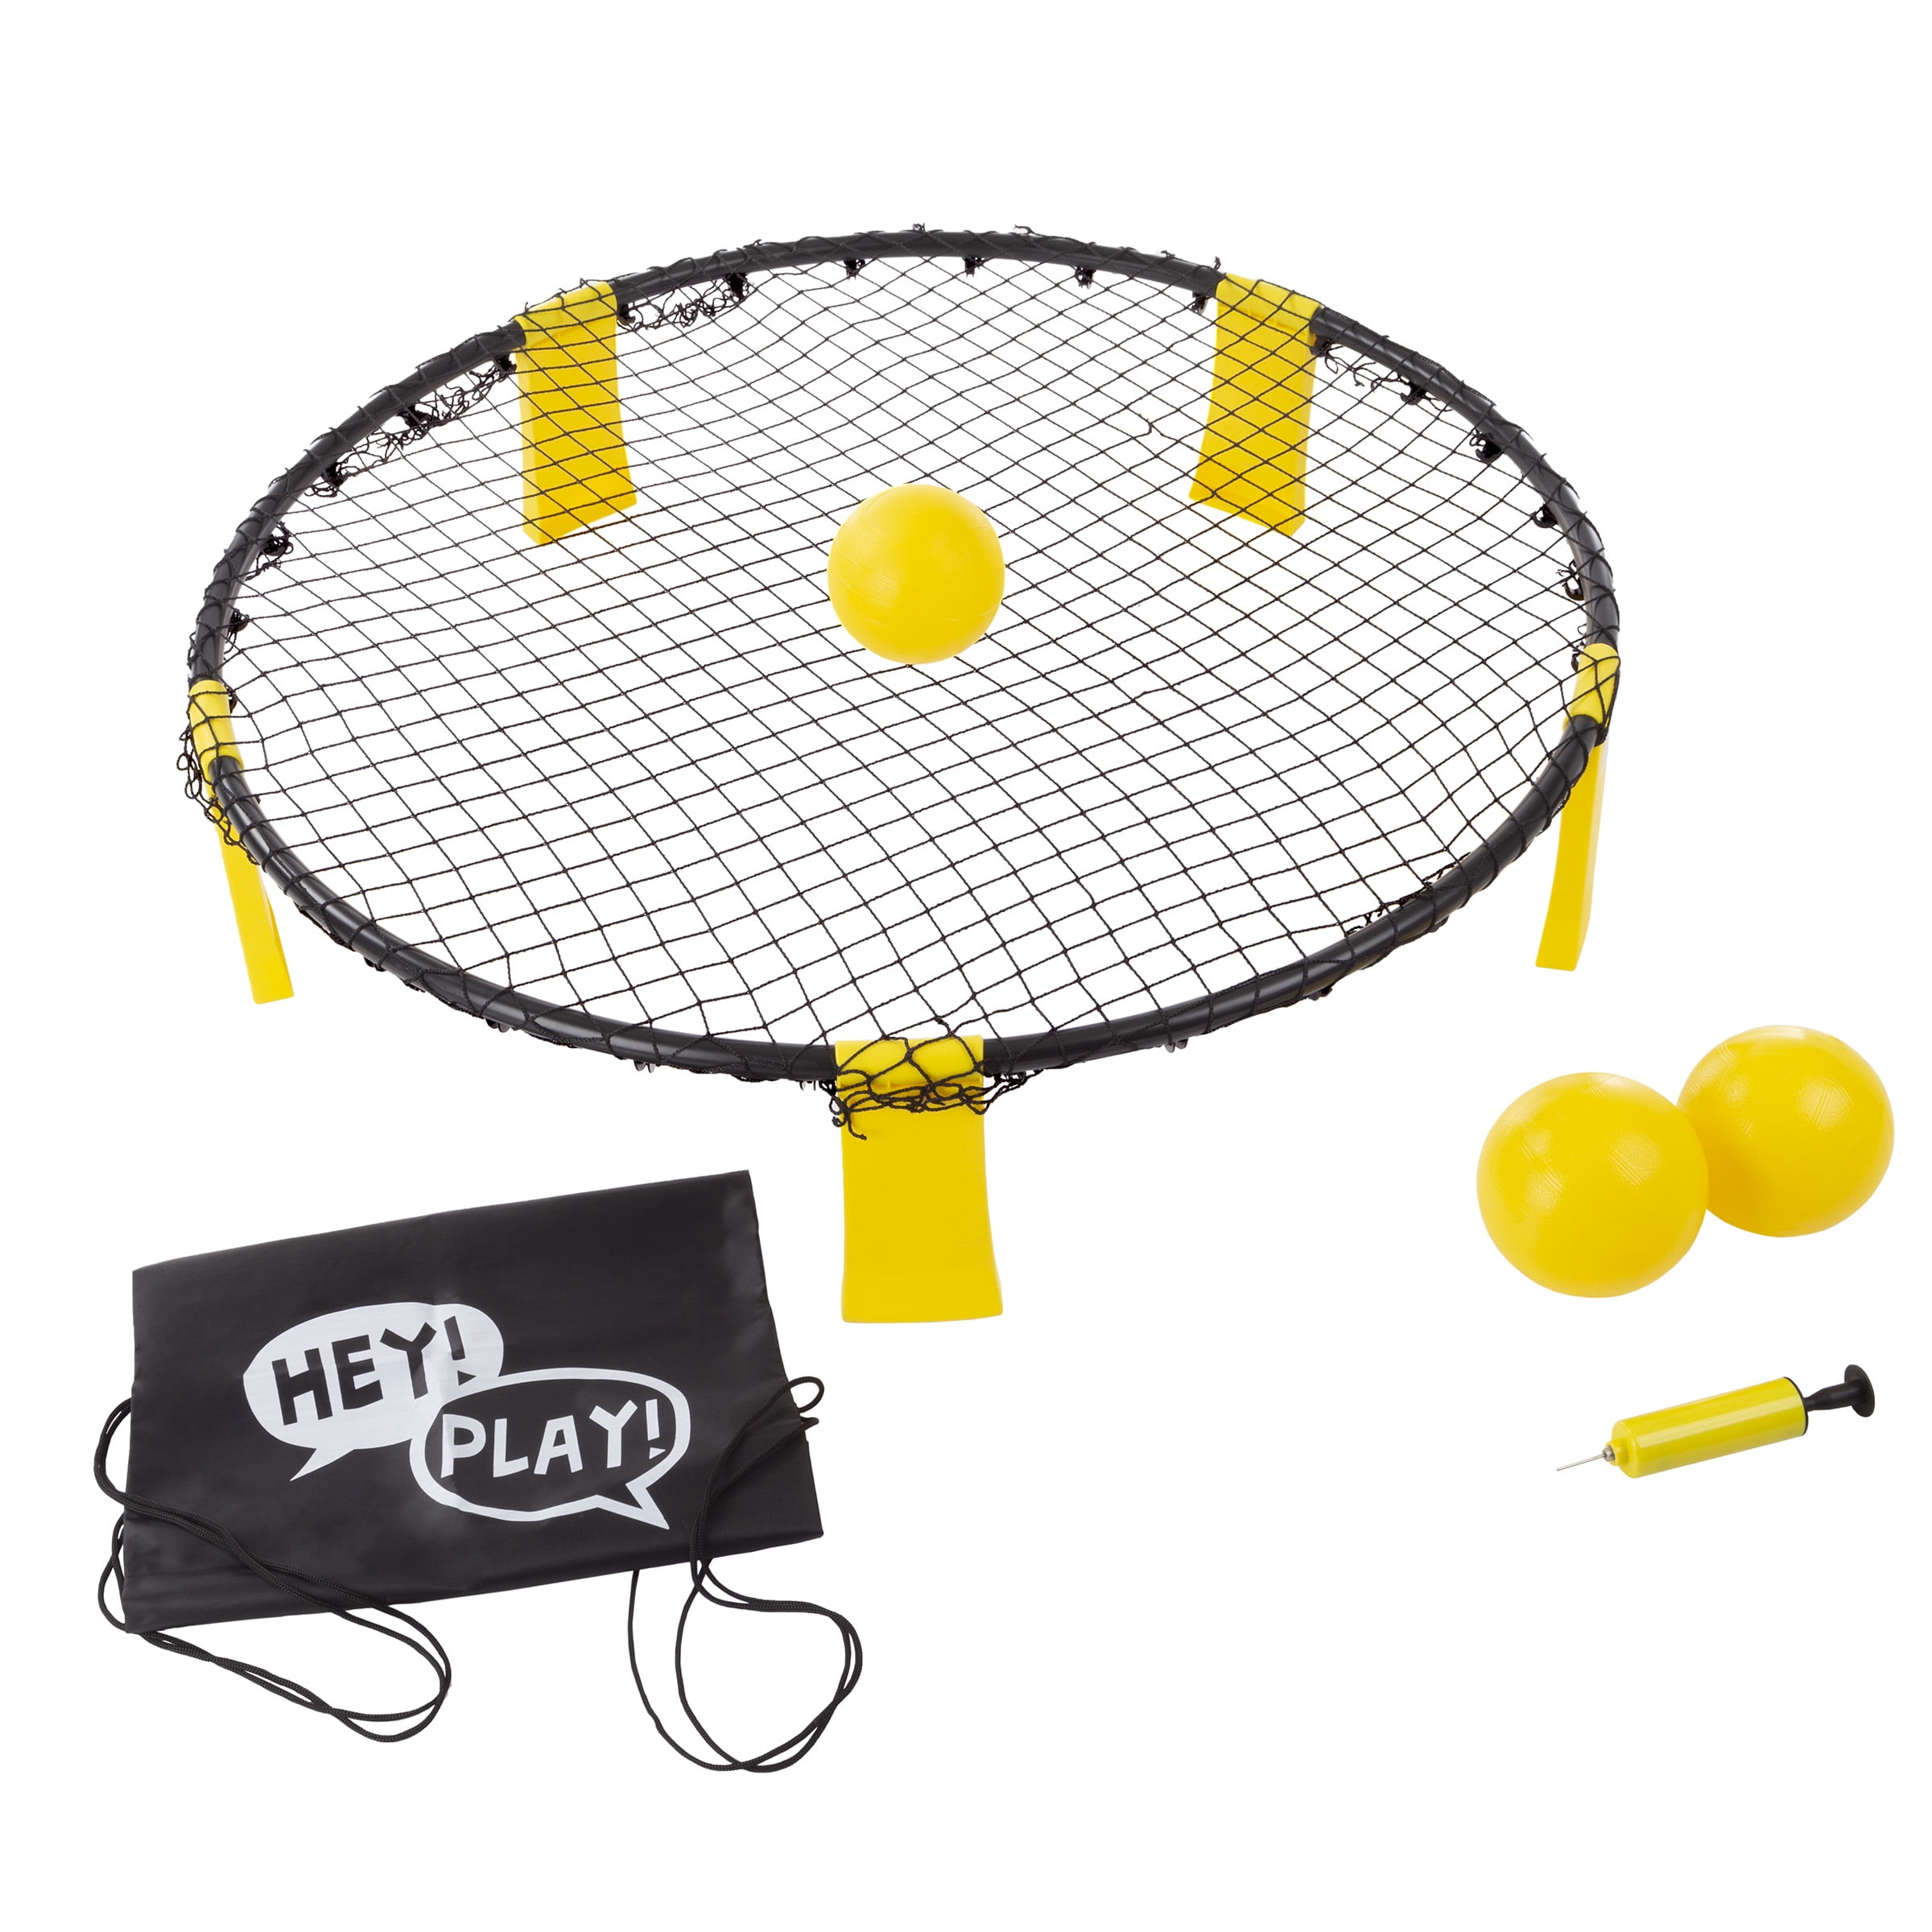 Spikeball Pro Set (Tournament Edition) – Includes stronger, more stable playing  net, upgraded balls designed for spin, backpack and ball pump. - Walmart.com